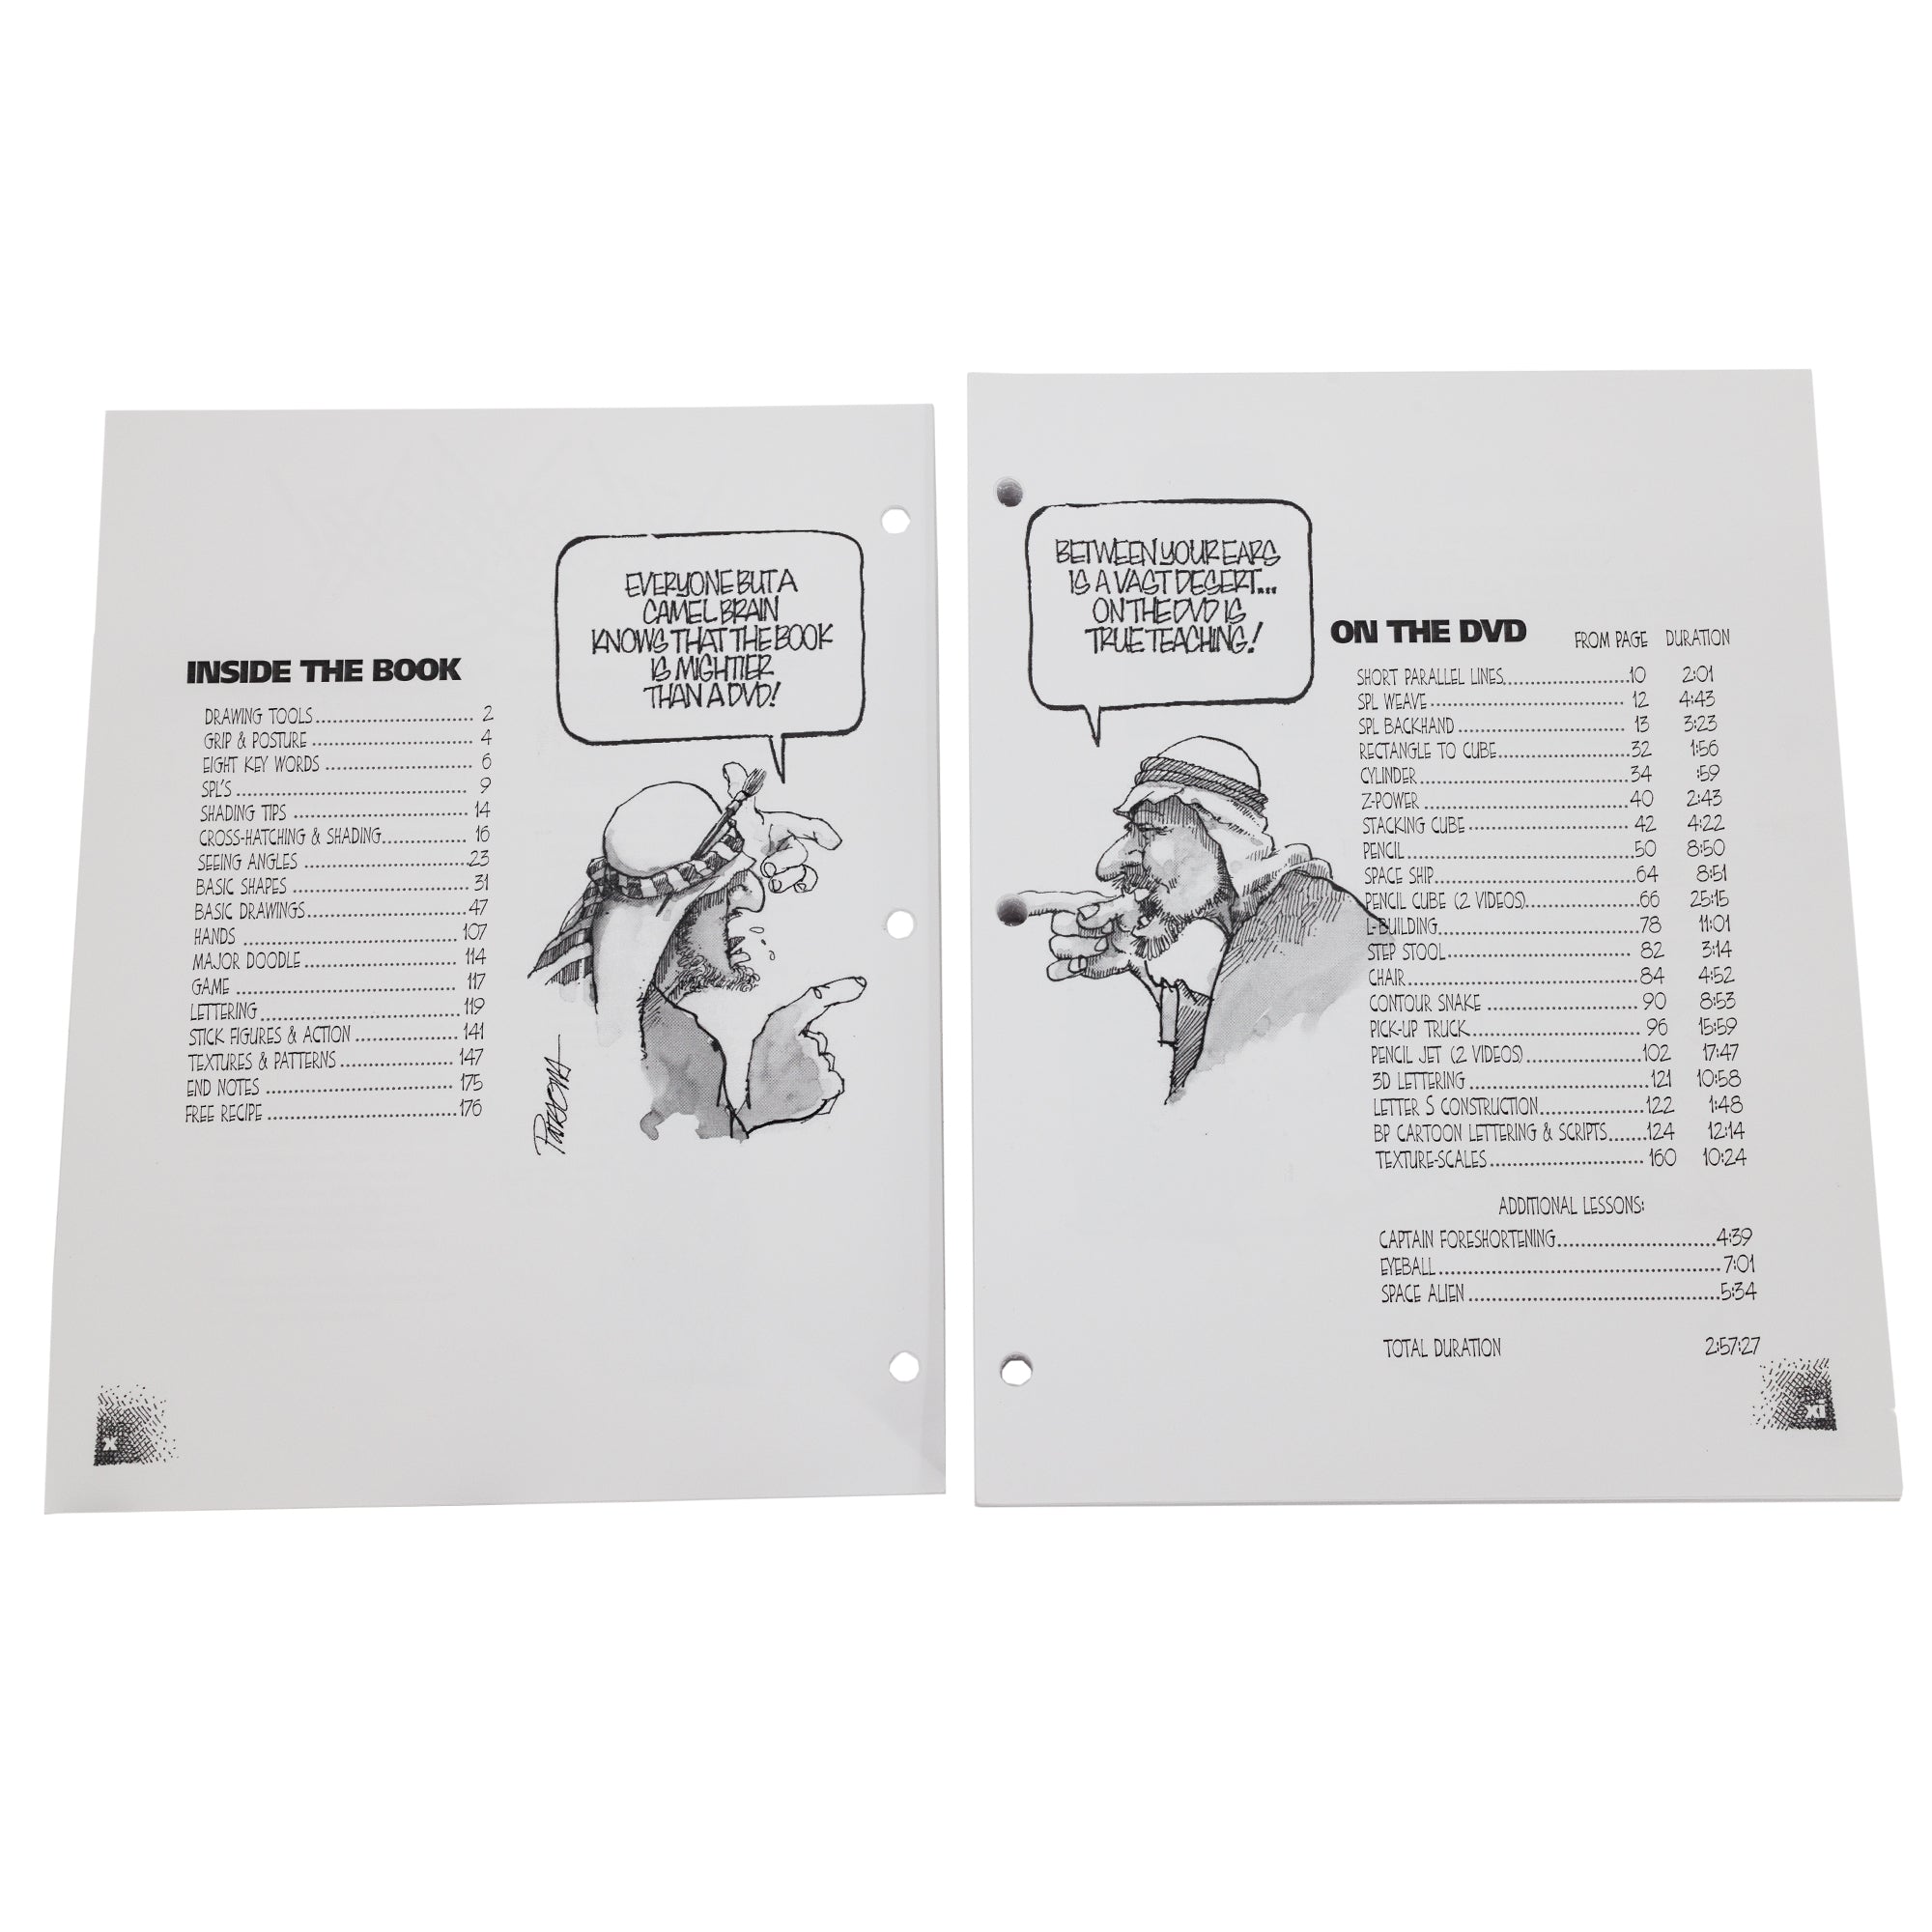 2, 3-hole punch contents pages of Simply Draw with Bob Parsons. The left page shows the contents for the book with a sketch of a man with an Arabian head wrap pointing at a man on the next page that also has an Arabian head wrap. They are arguing about whether a book or a DVD is better. The right page show the contents of the DVD.